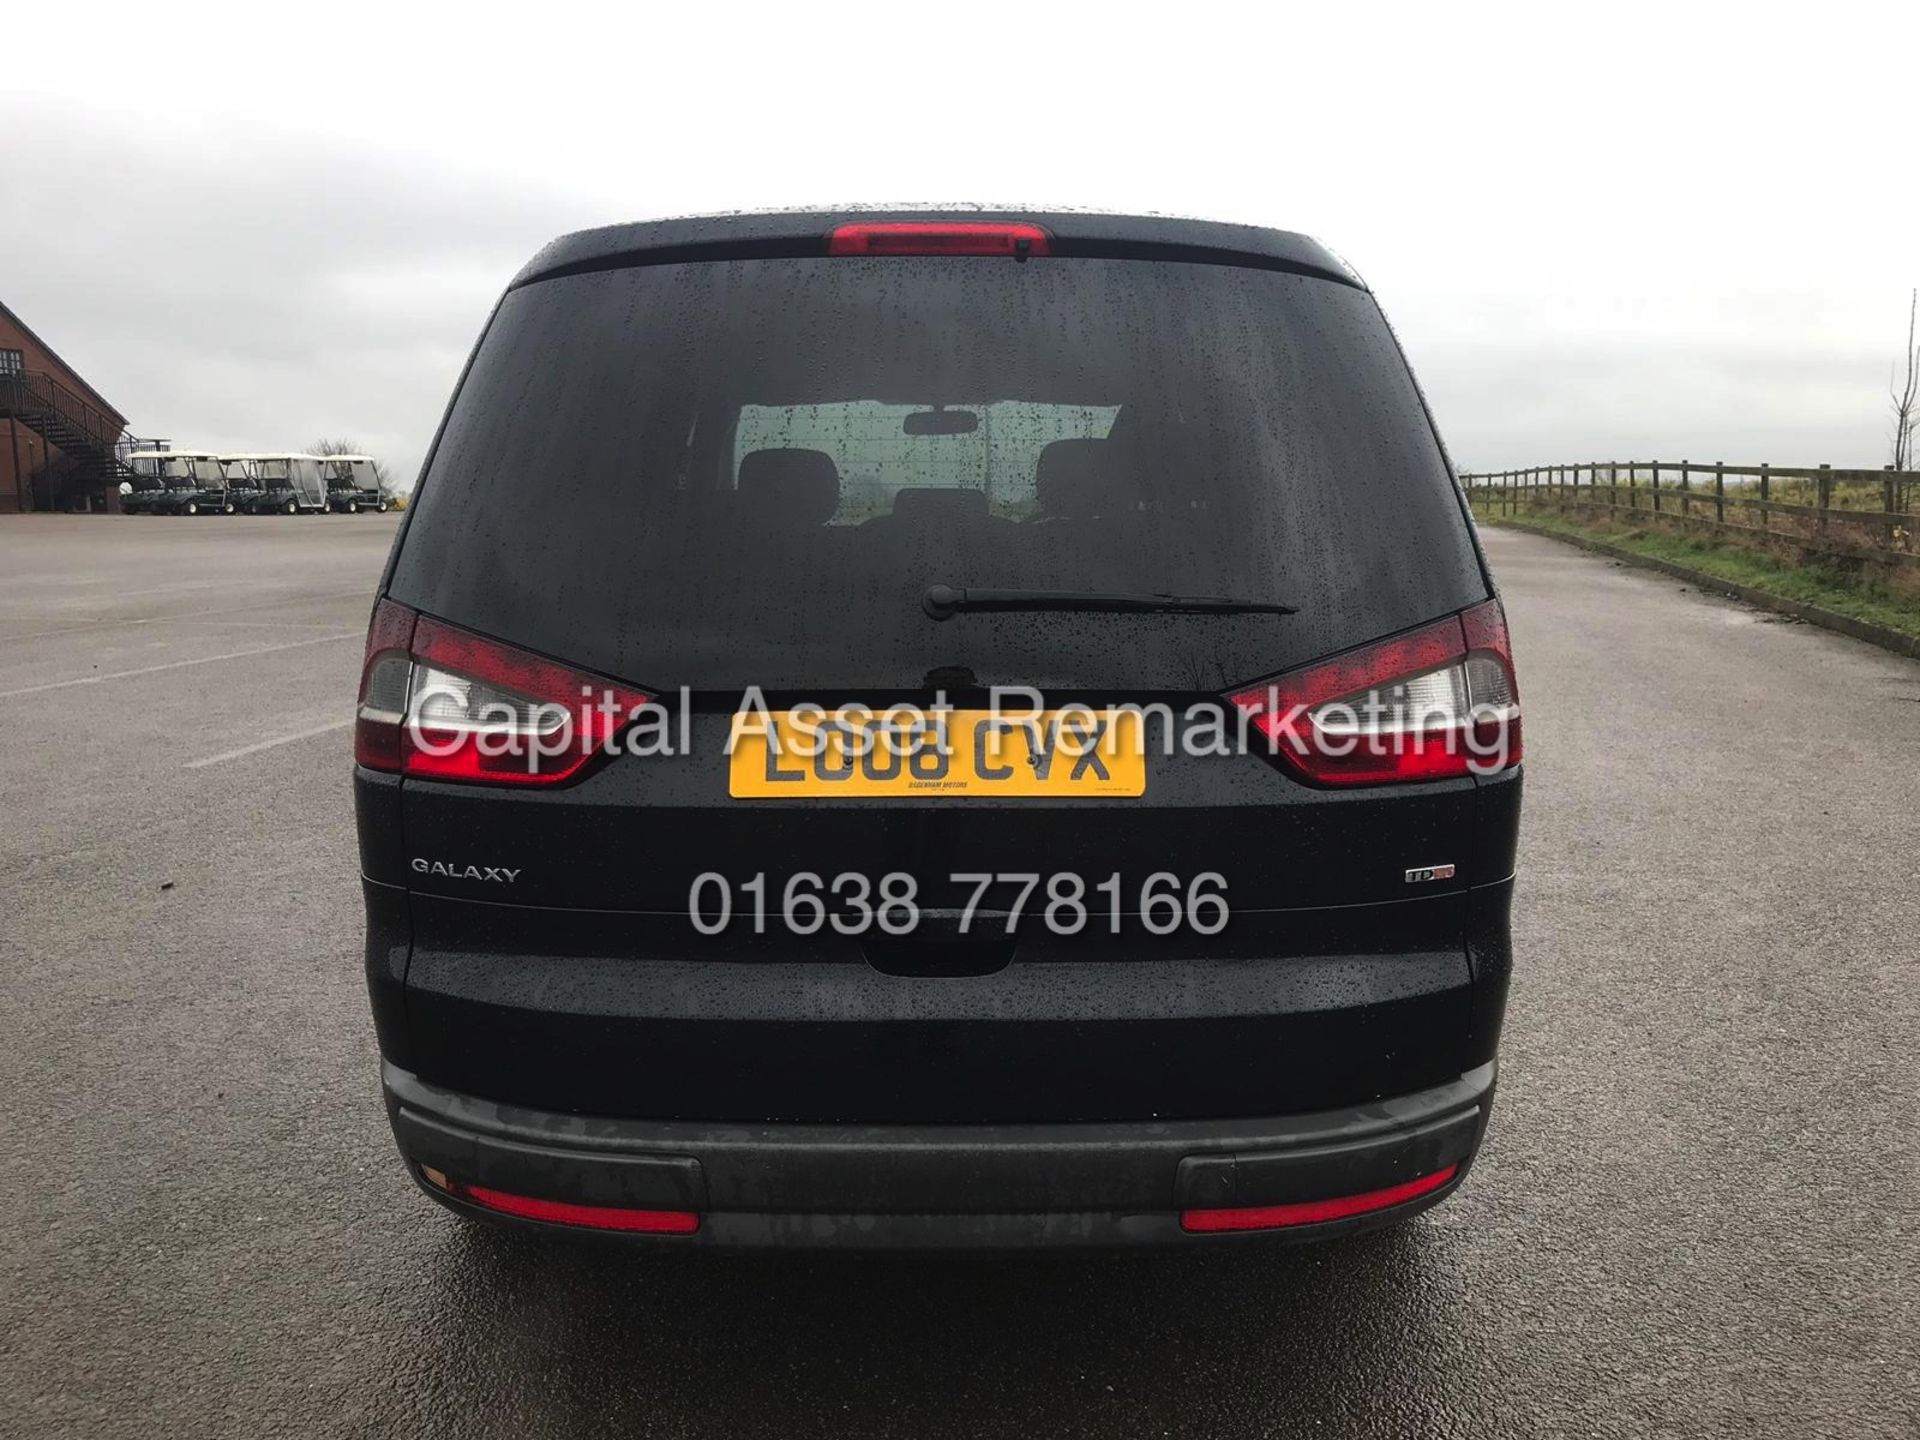 (ON SALE) FORD GALAXY 2.0TDCI "EDGE" 7 SEATER - 08 REG - AIR CON - 1 PREVIOUS OWNER - BLACK - Image 2 of 14